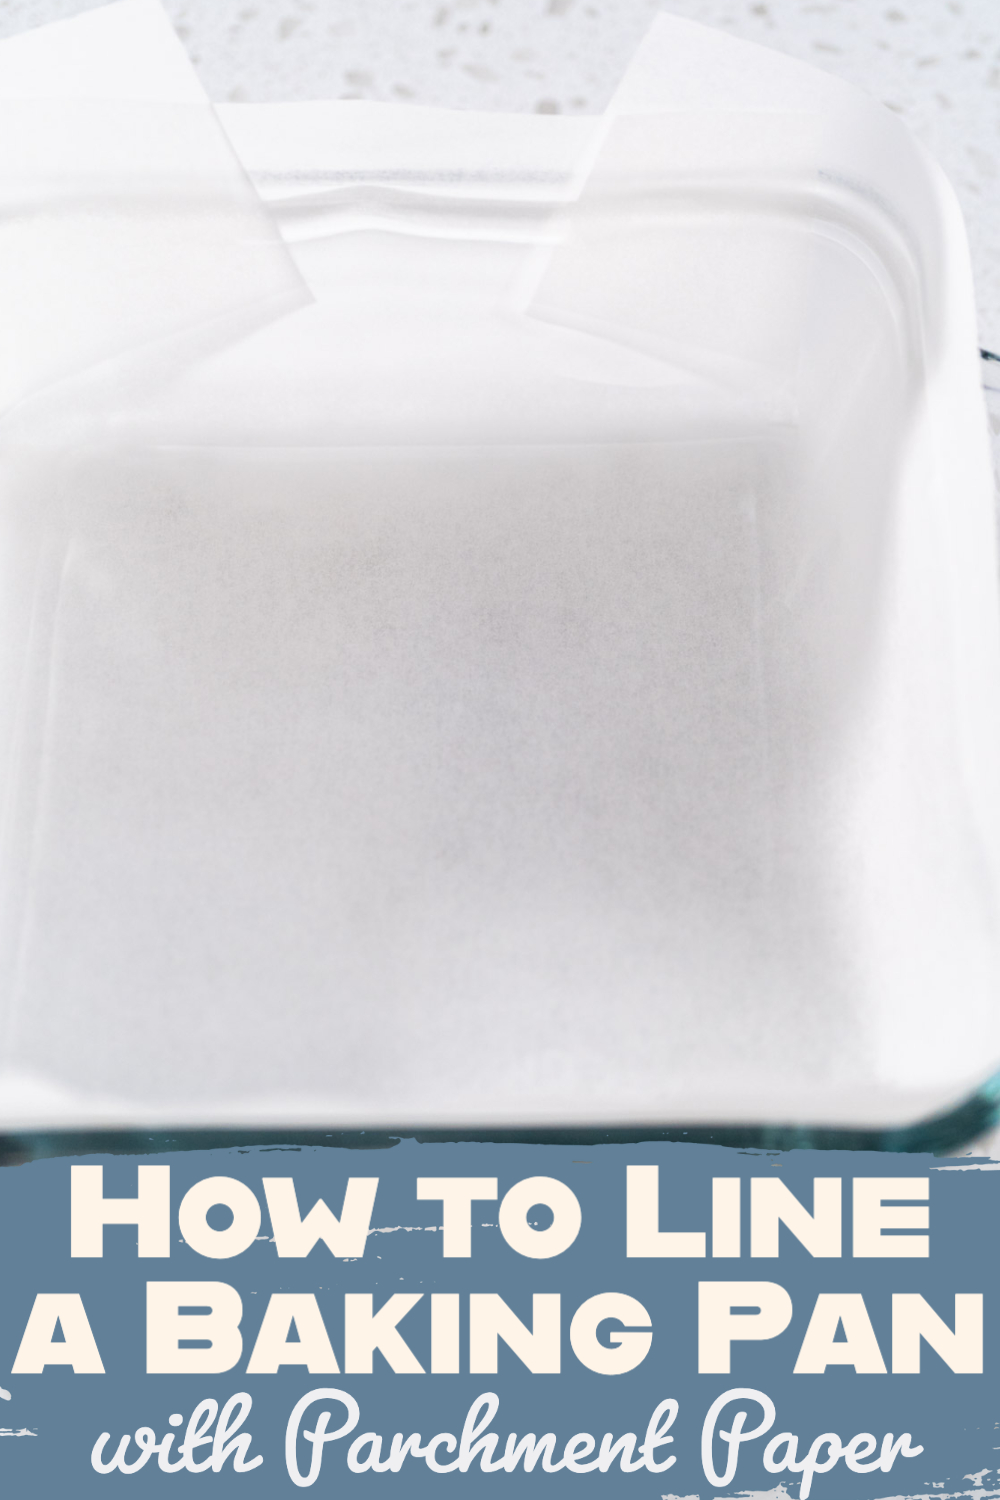 How to Line a Baking Pan with Parchment Paper